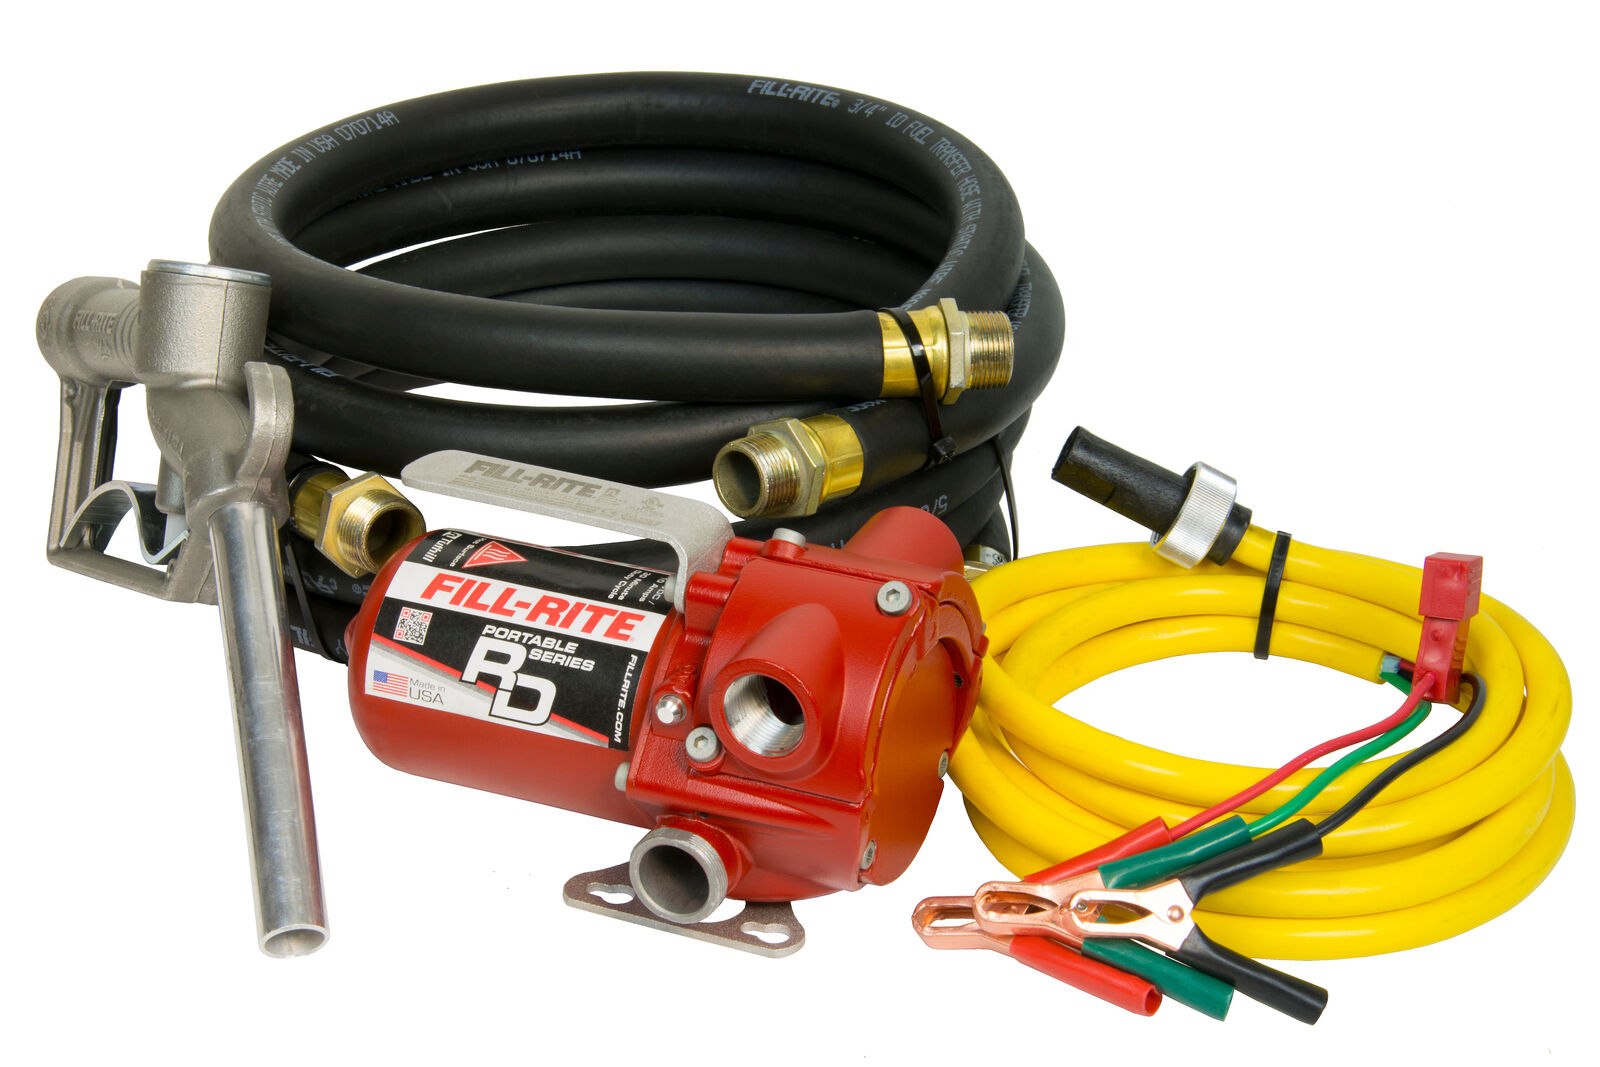 Fill-Rite RD812NH 12V 8 GPM Portable Fuel Pump w/Hoses, Nozzle, & Power Cable